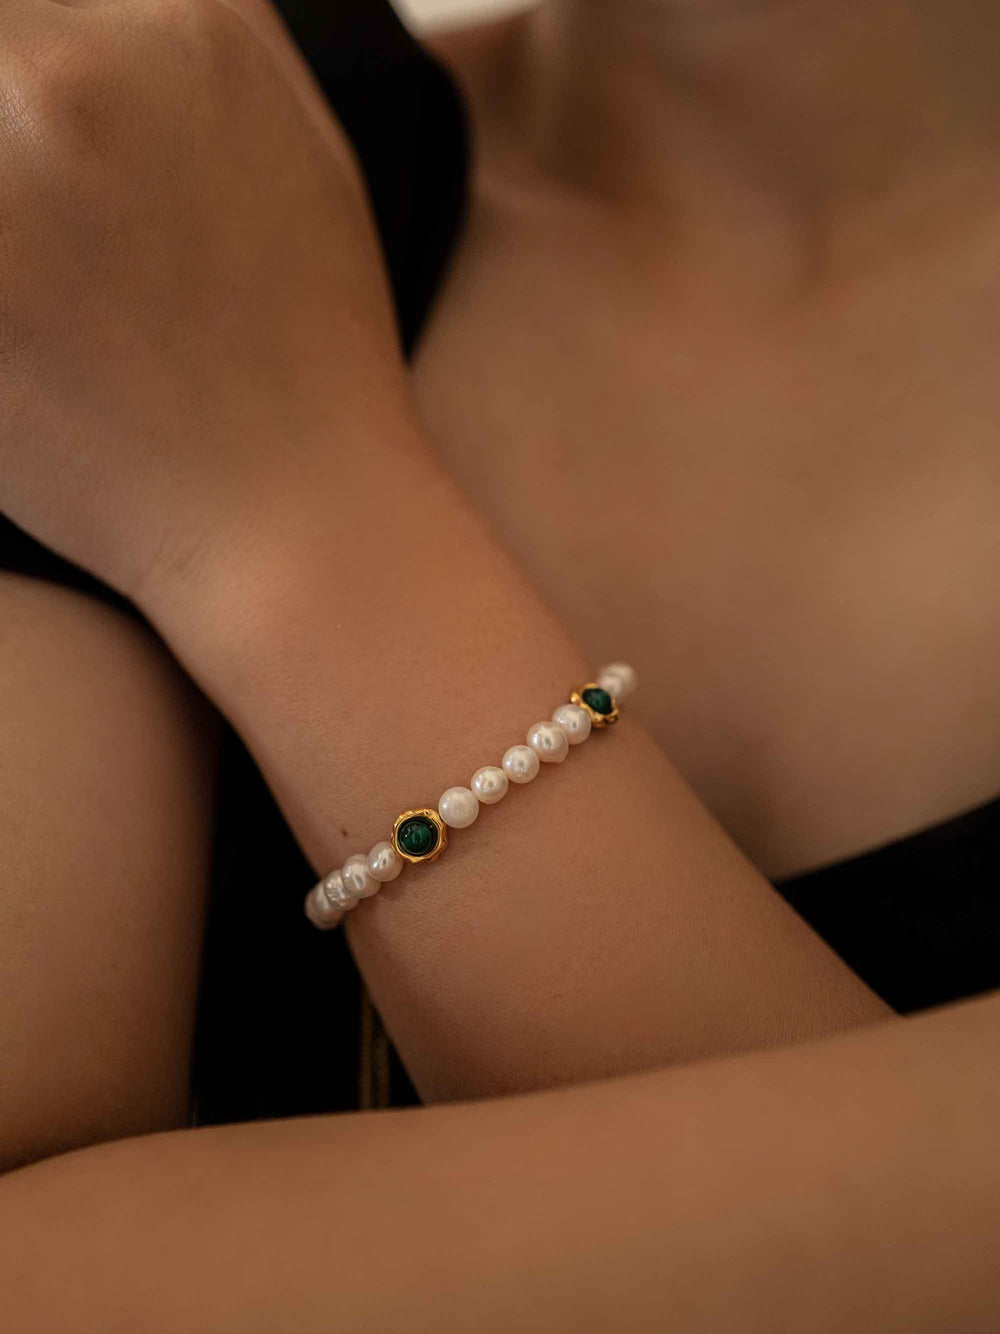 a model wear A bracelet of green stones and cultured pearls with gold